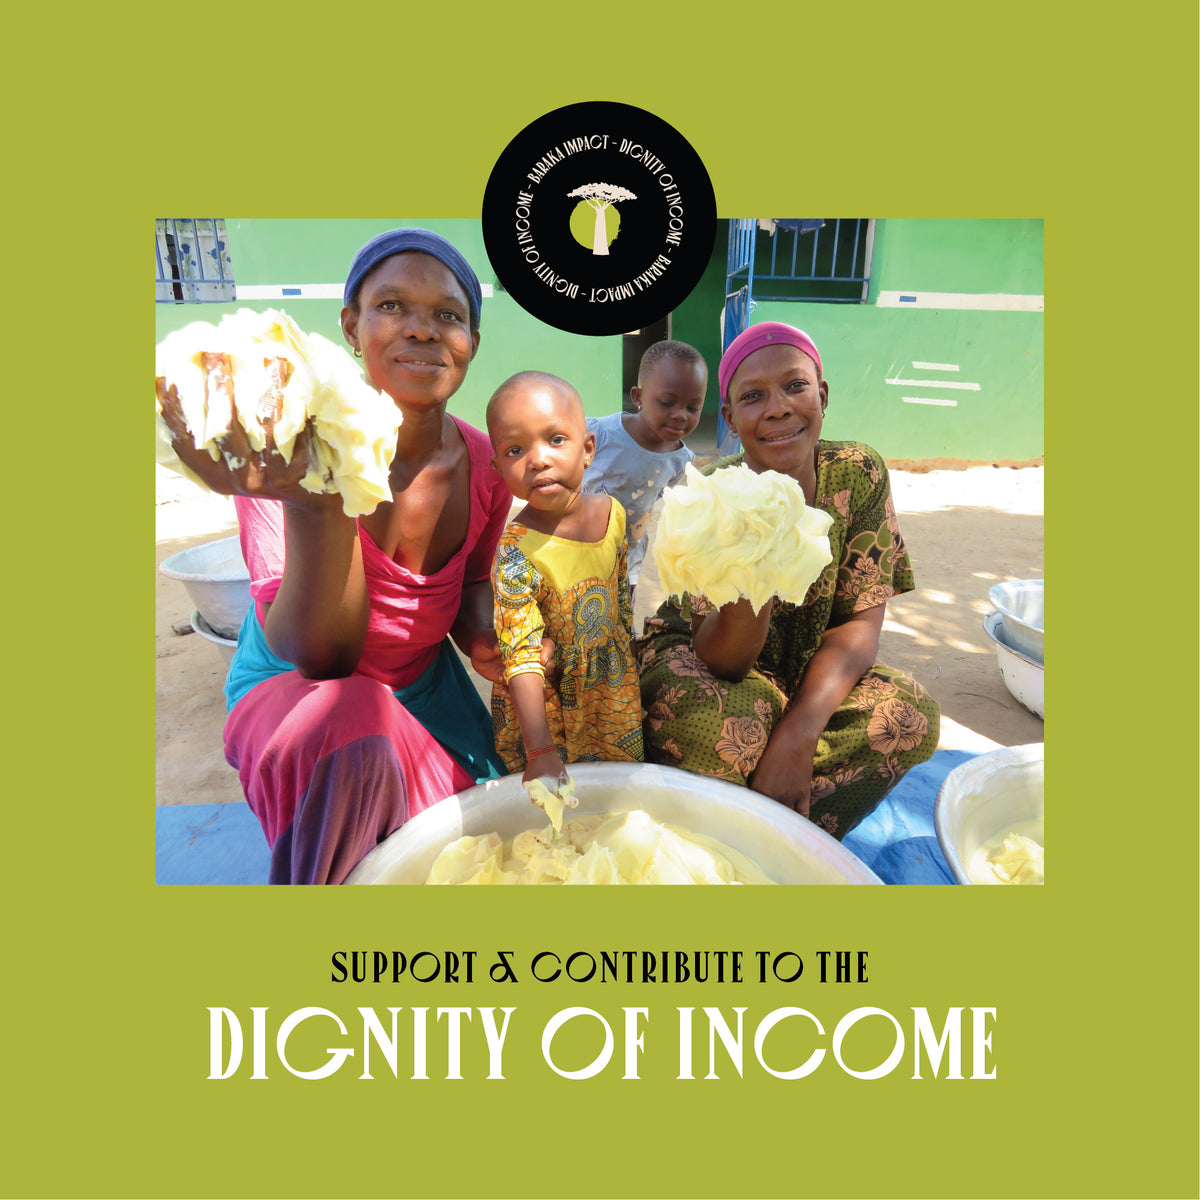 Dignity of Income Fund